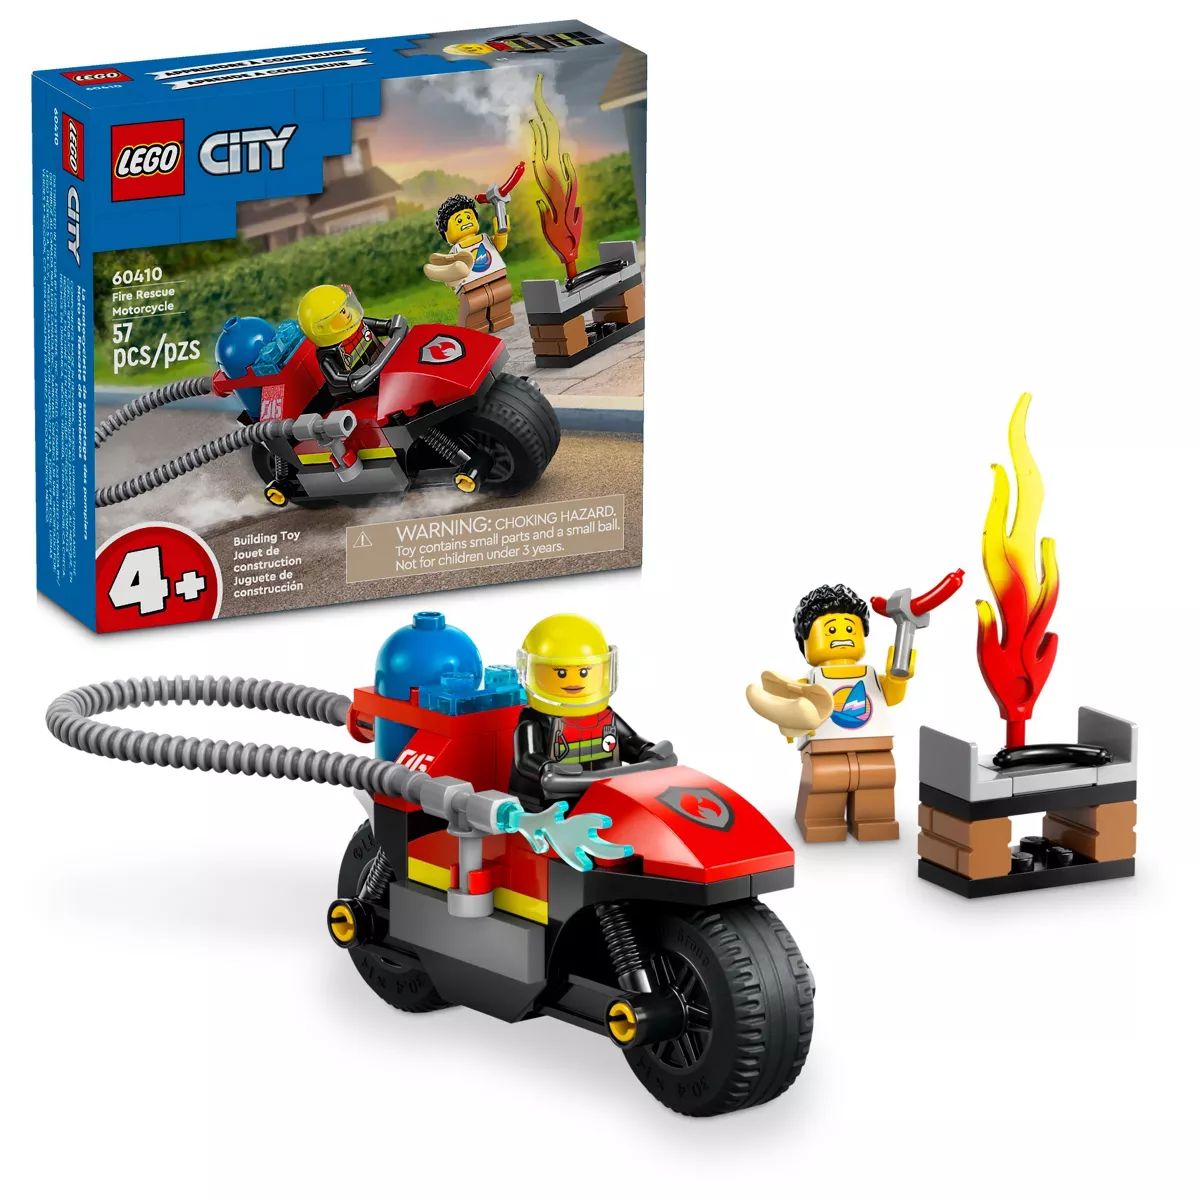 LEGO City Fire Rescue Motorcycle Toy Building Set 60410 | Target